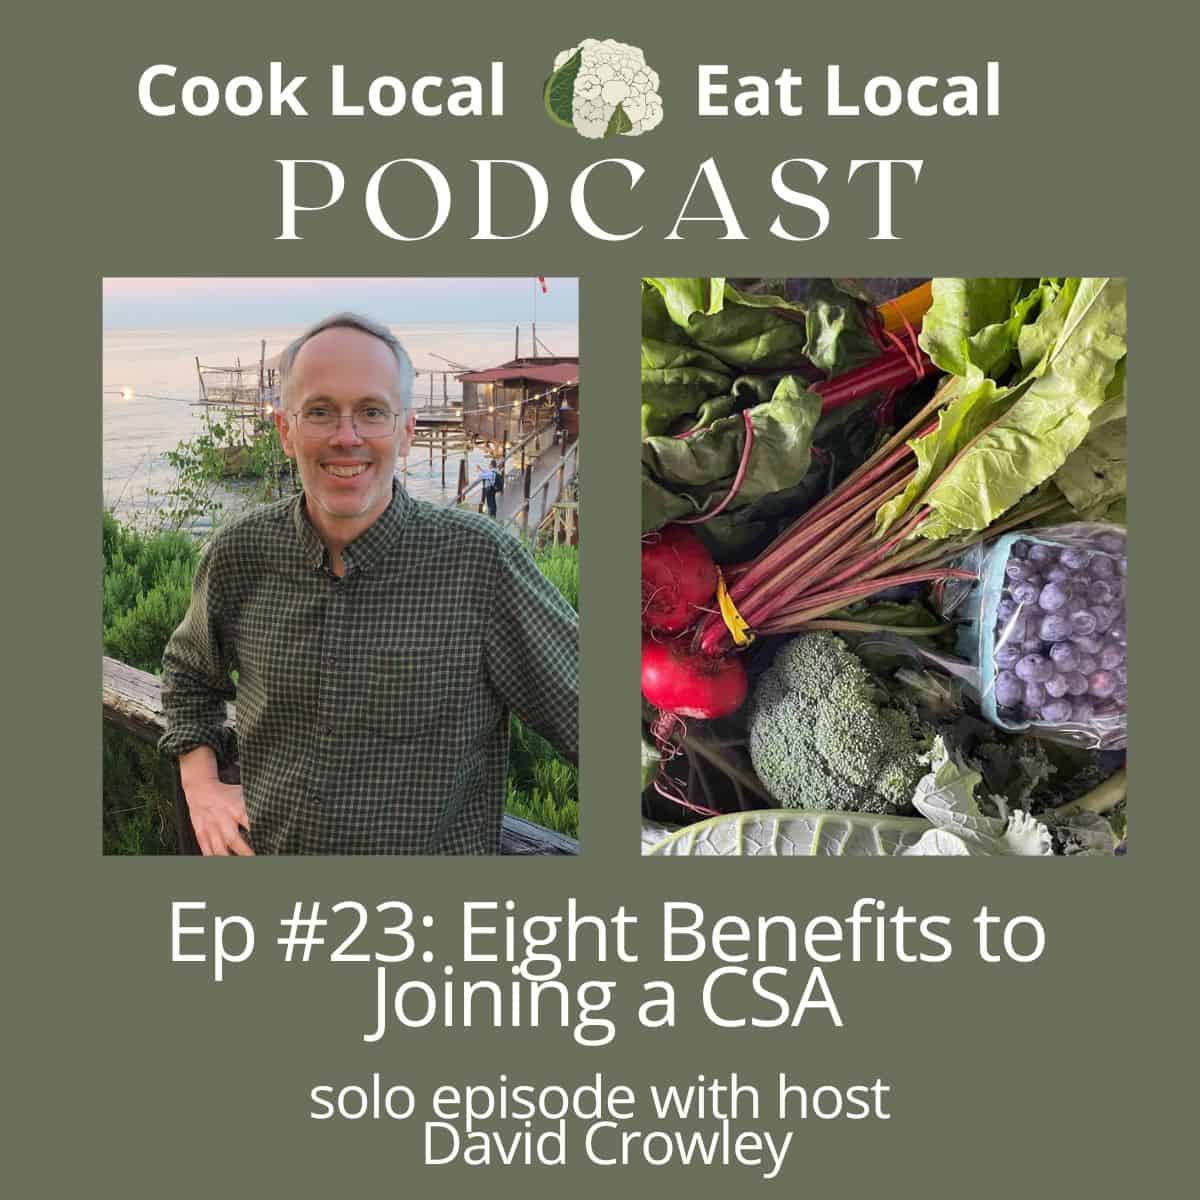 Cook Local Eat Local podcast cover, with a photo of host David Crowley on the left and some CSA vegetables on the right. Underneath the photos, text that says "Eight benefits to joining a CSA".